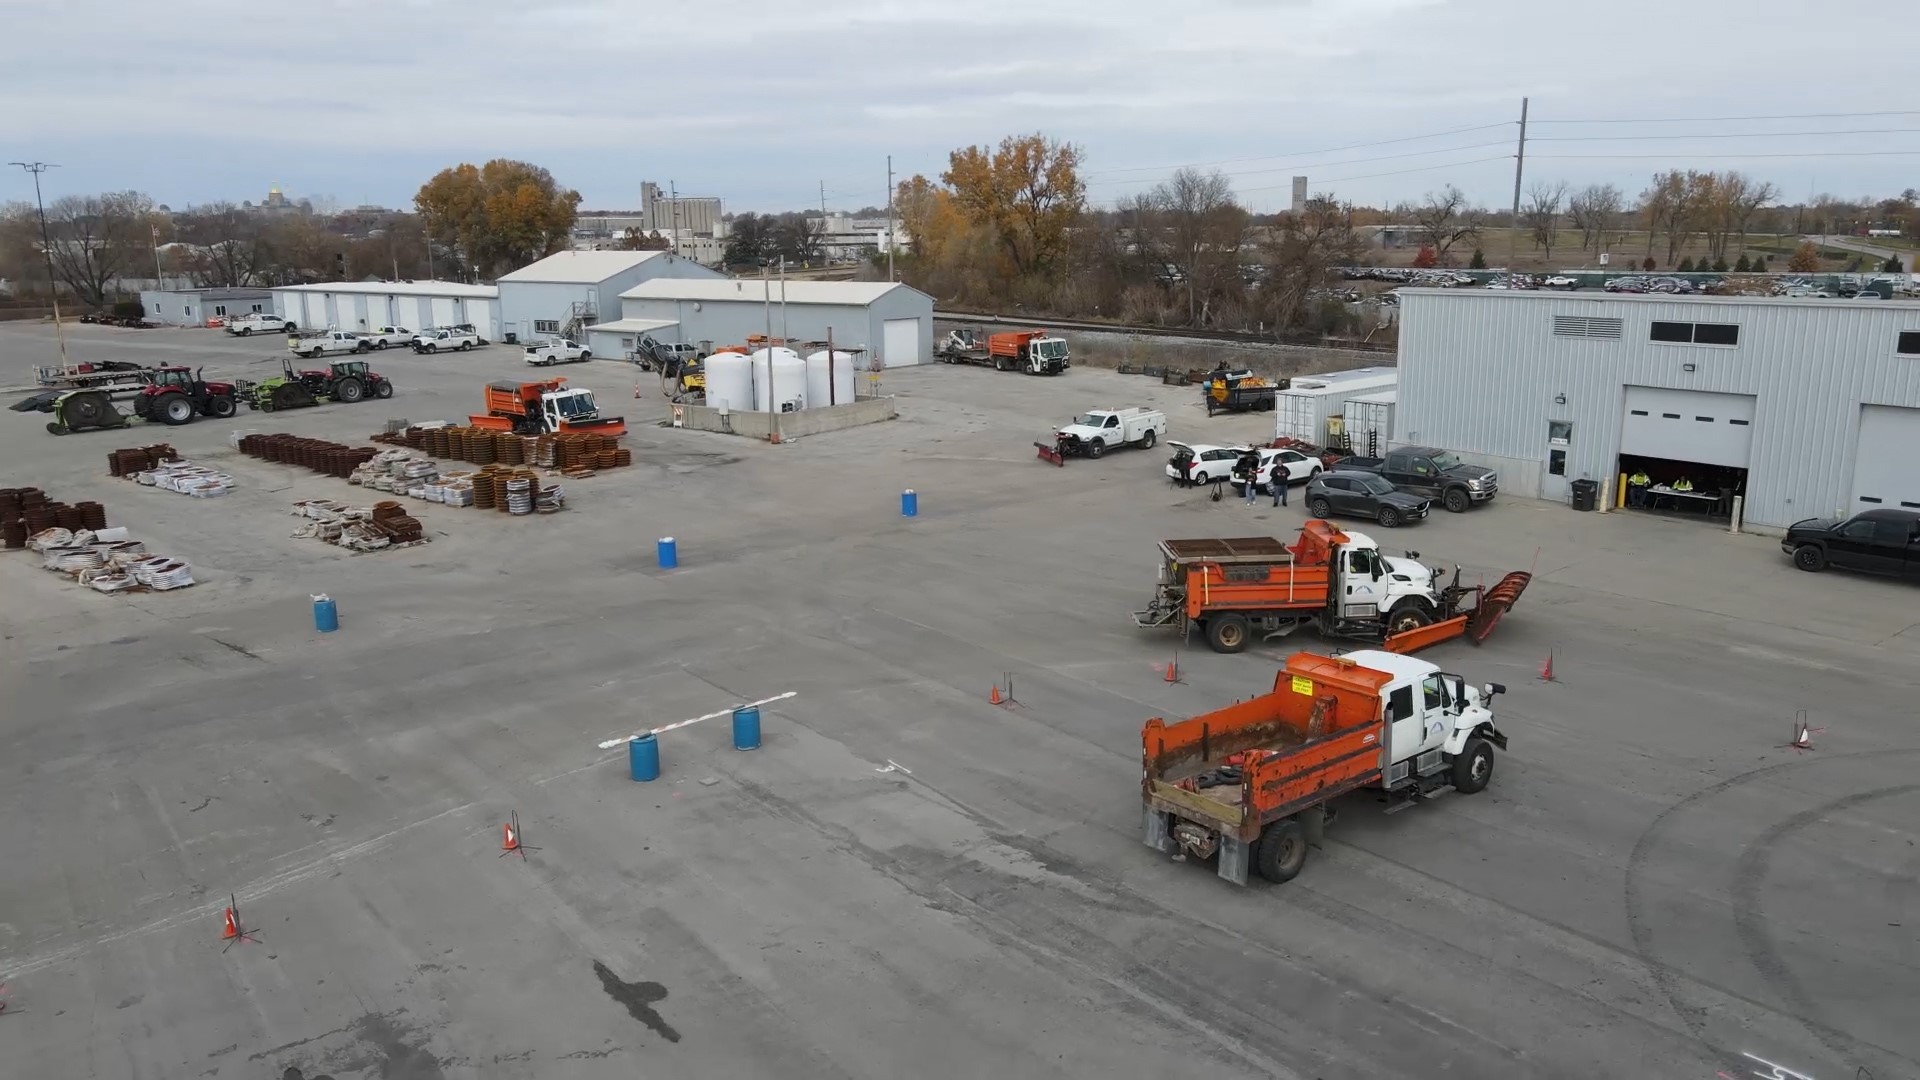 Get a bird's-eye view of city snow plows as they ready for winter weather.